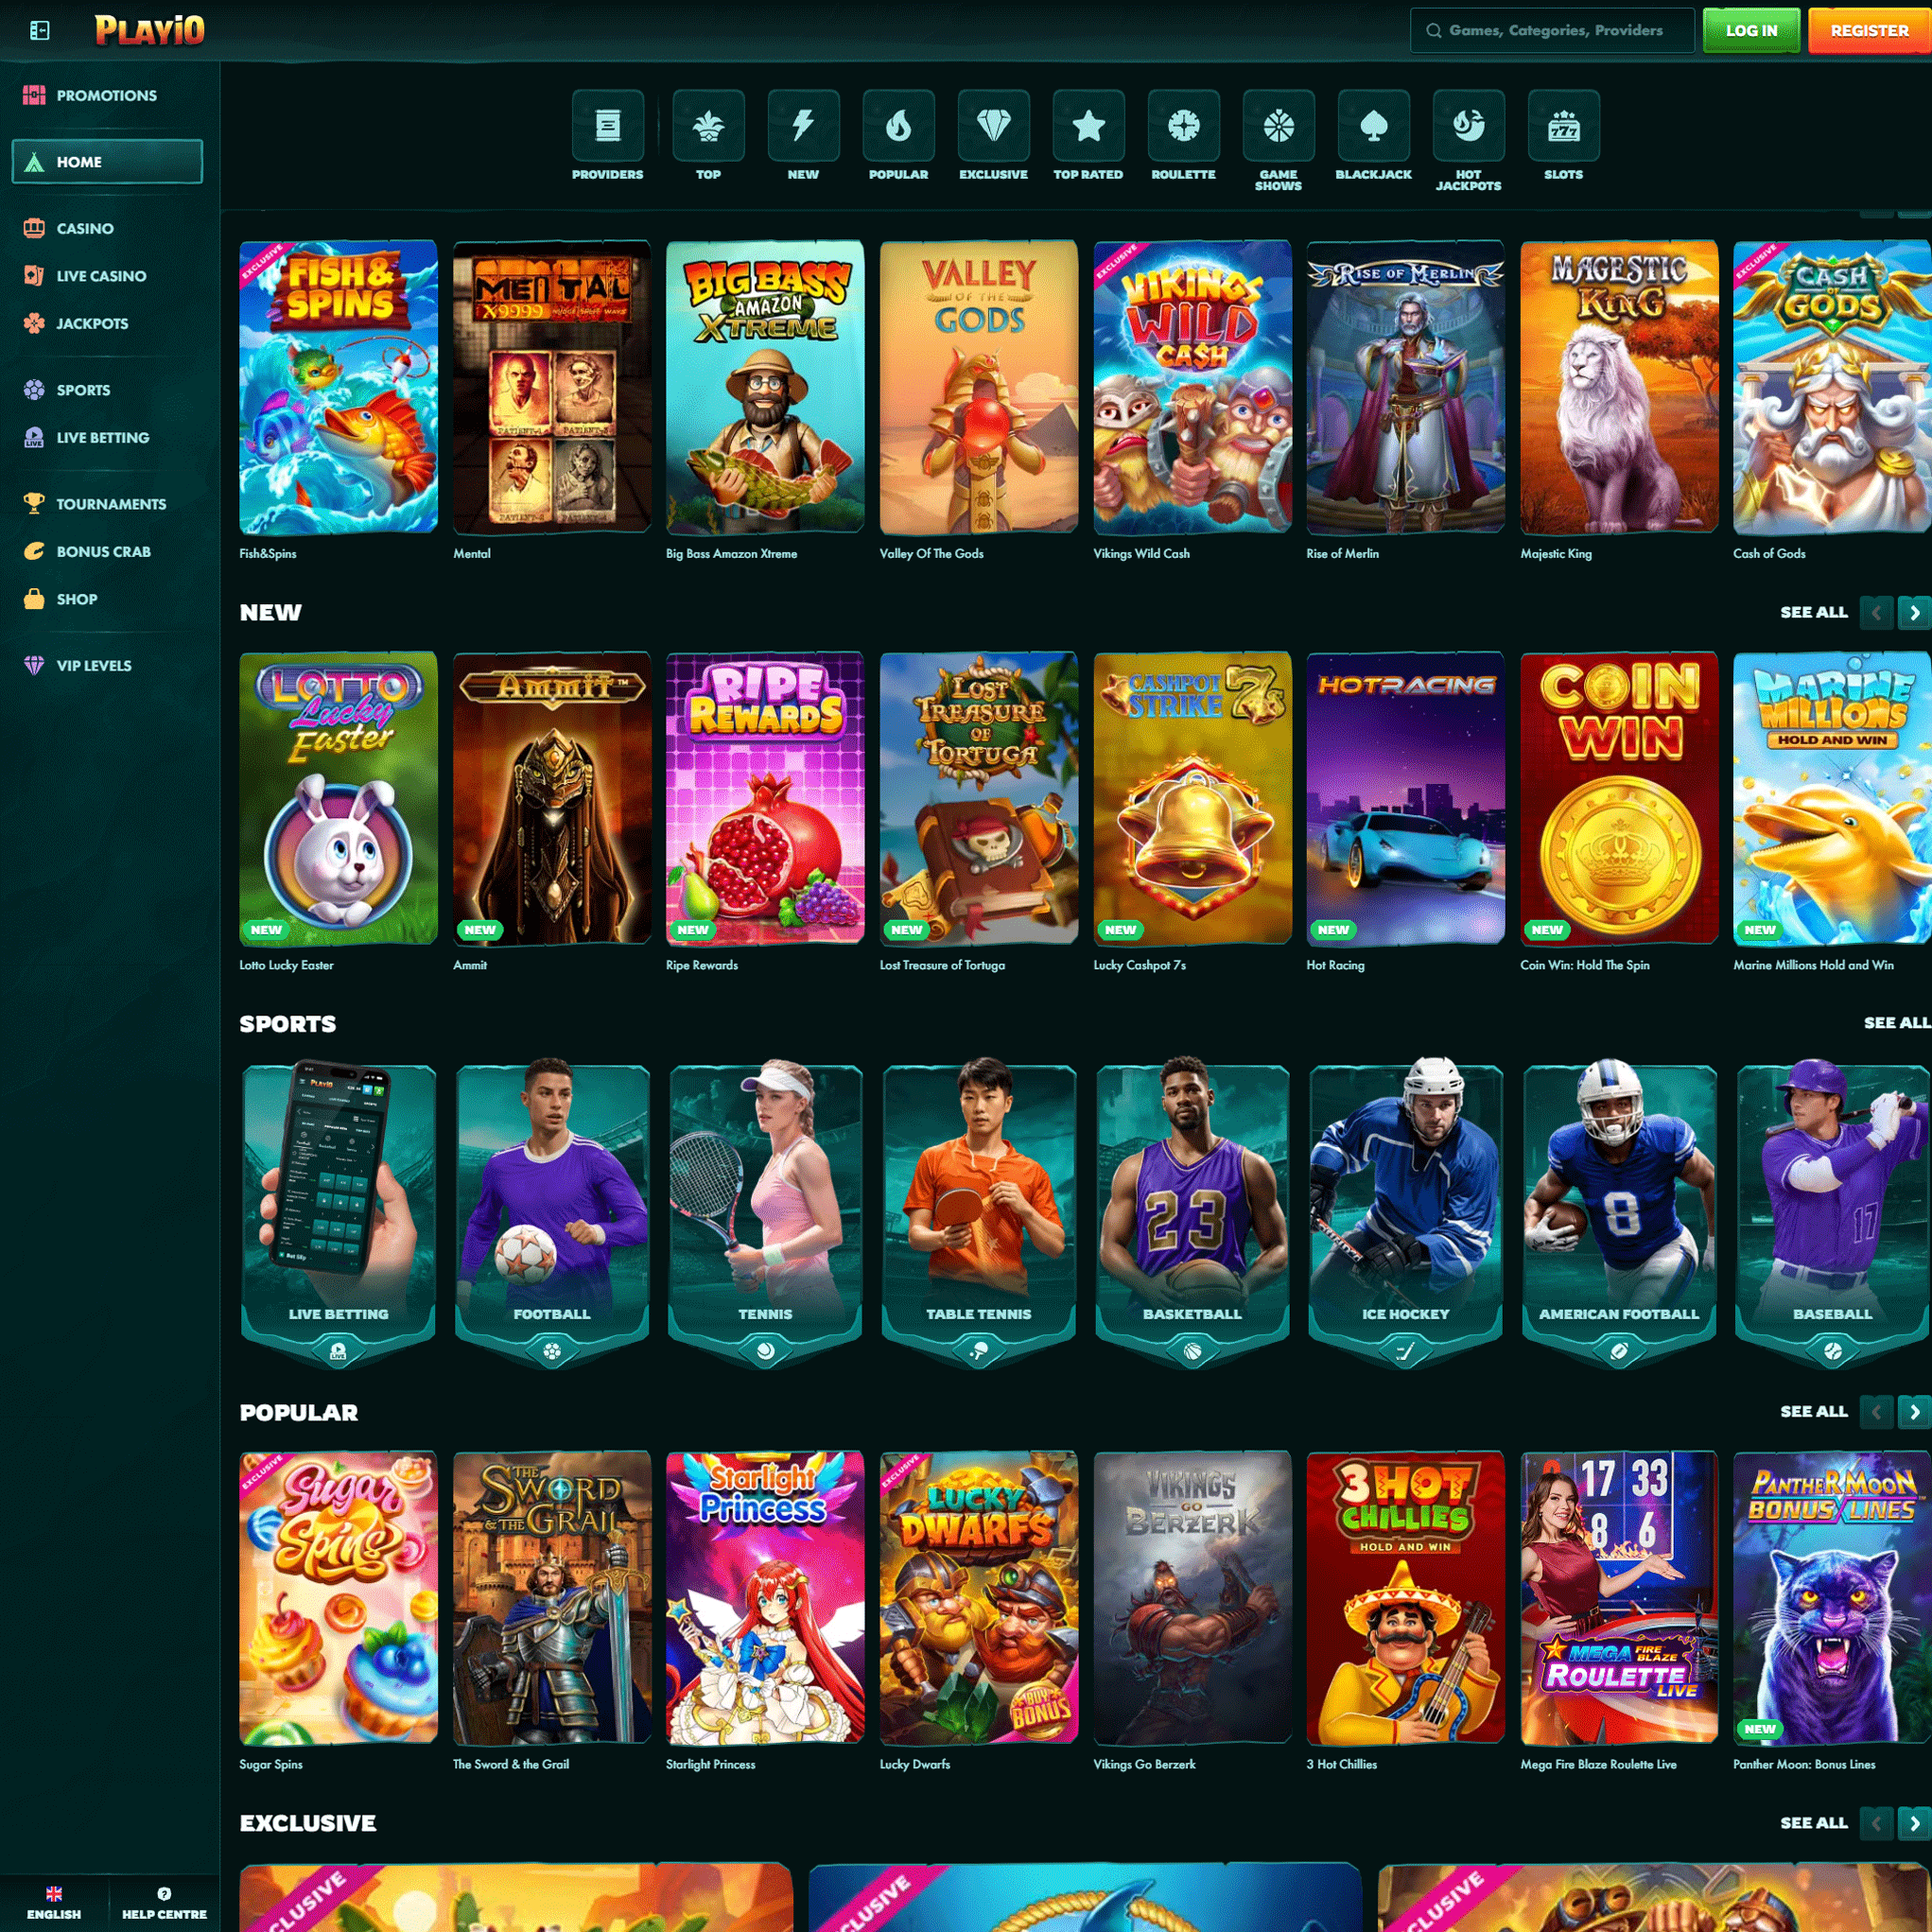 Playio Casino review by Mr. Gamble